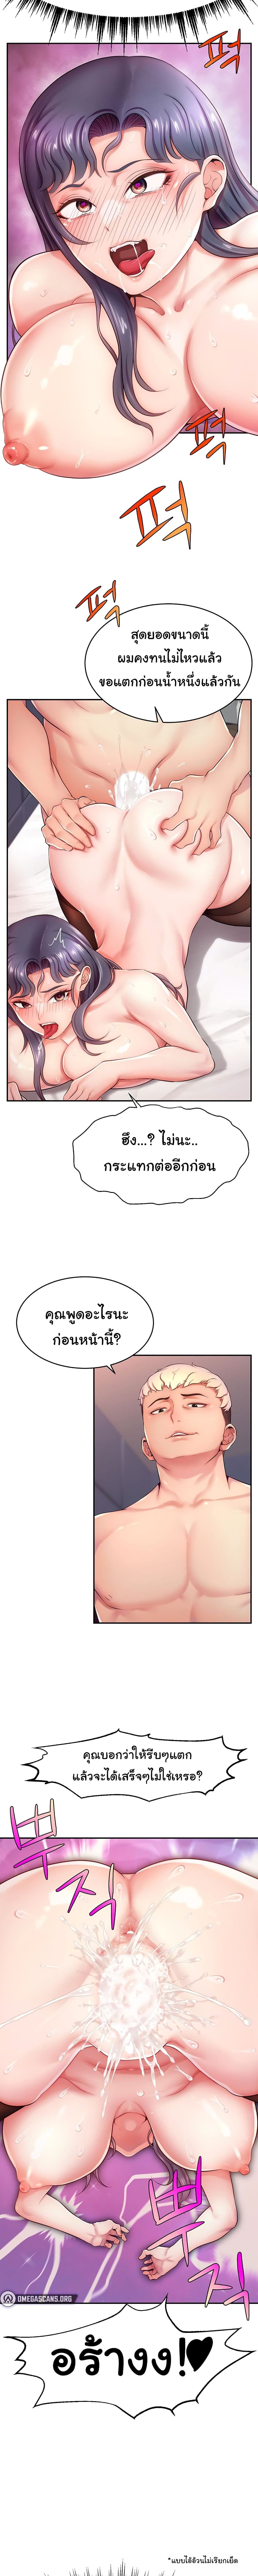 Making Friends With Streamers by Hacking! ตอนที่ 2 ภาพ 19